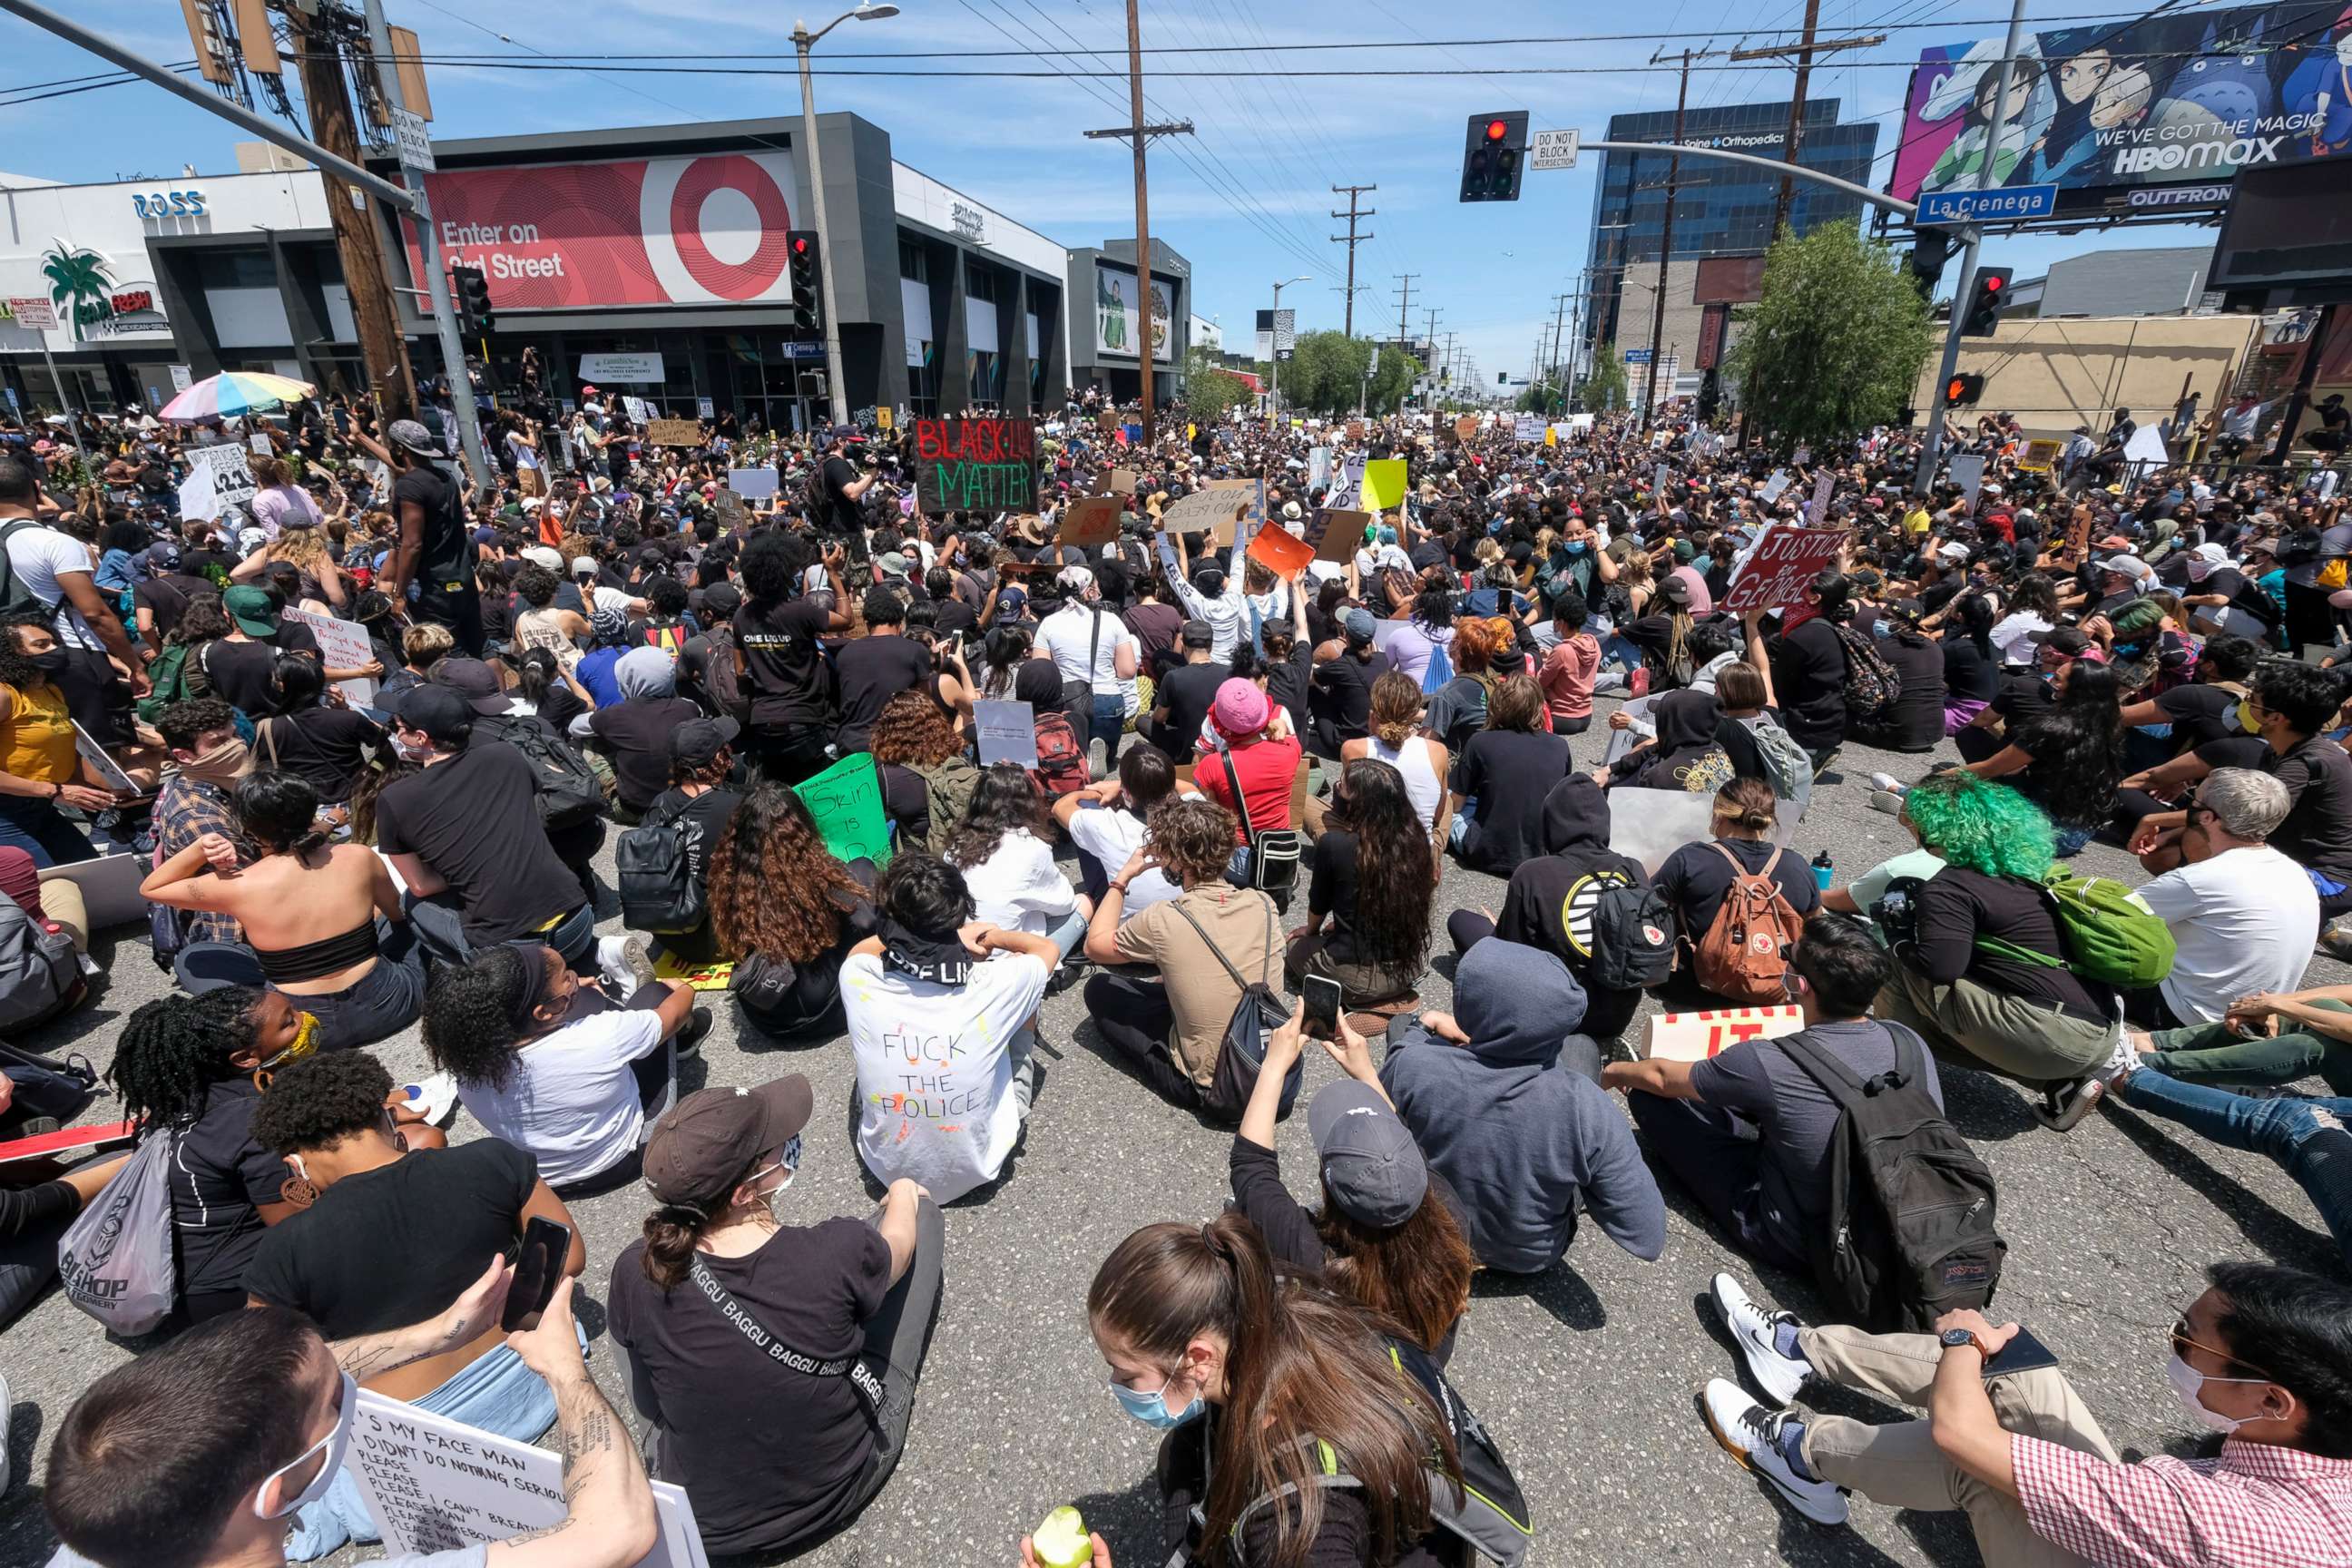 PHOTO: Peoples sit on at an intersection during a protest over the death of George Floyd in Los Angeles, May 30, 2020.